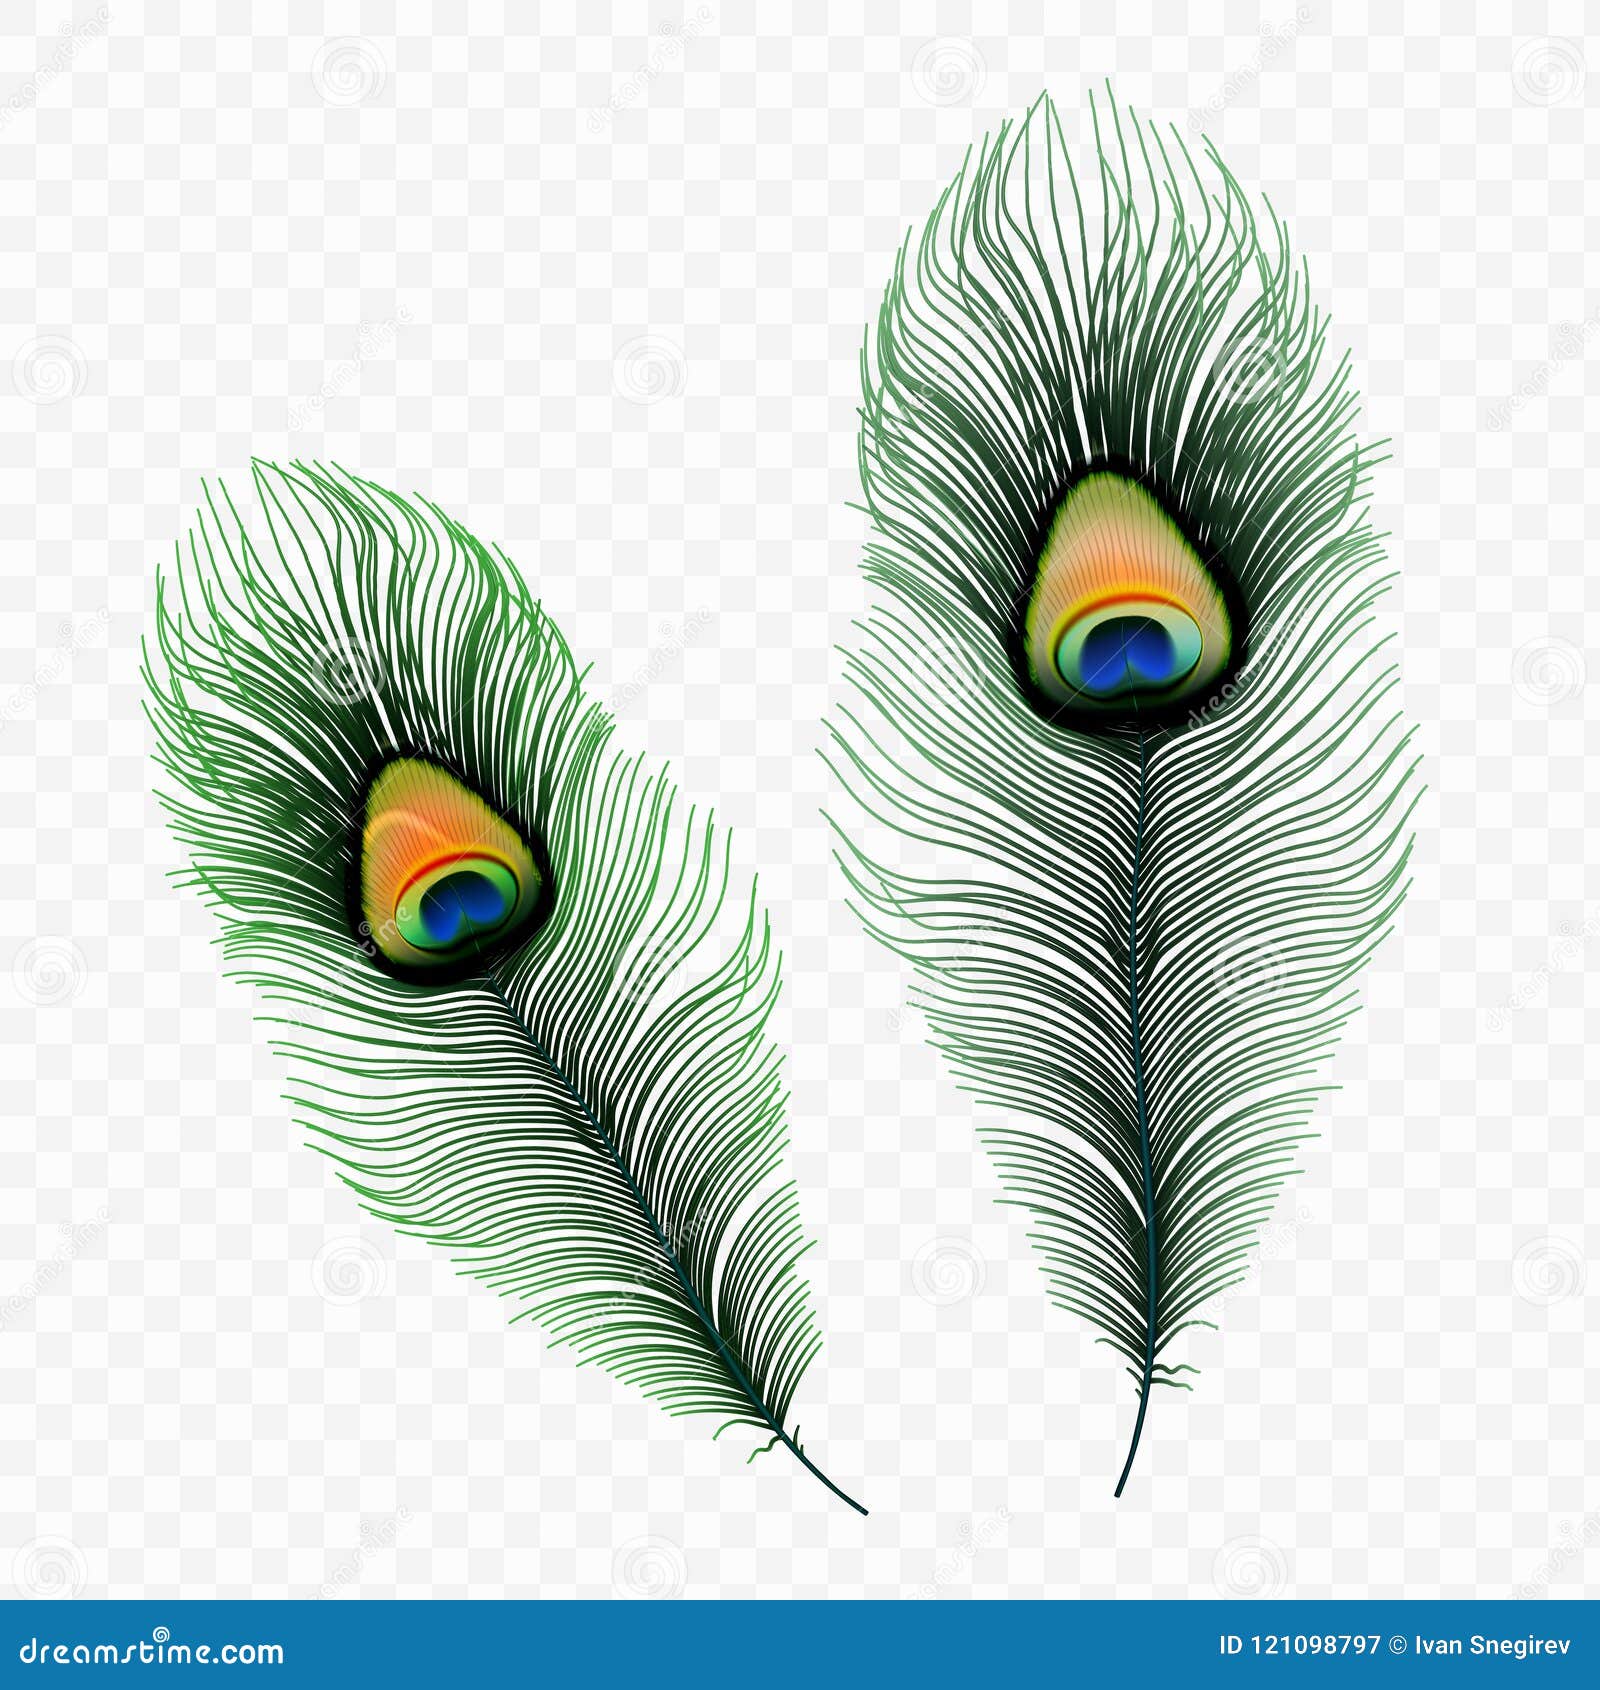 65 Pecock Feather Images, Stock Photos, 3D objects, & Vectors